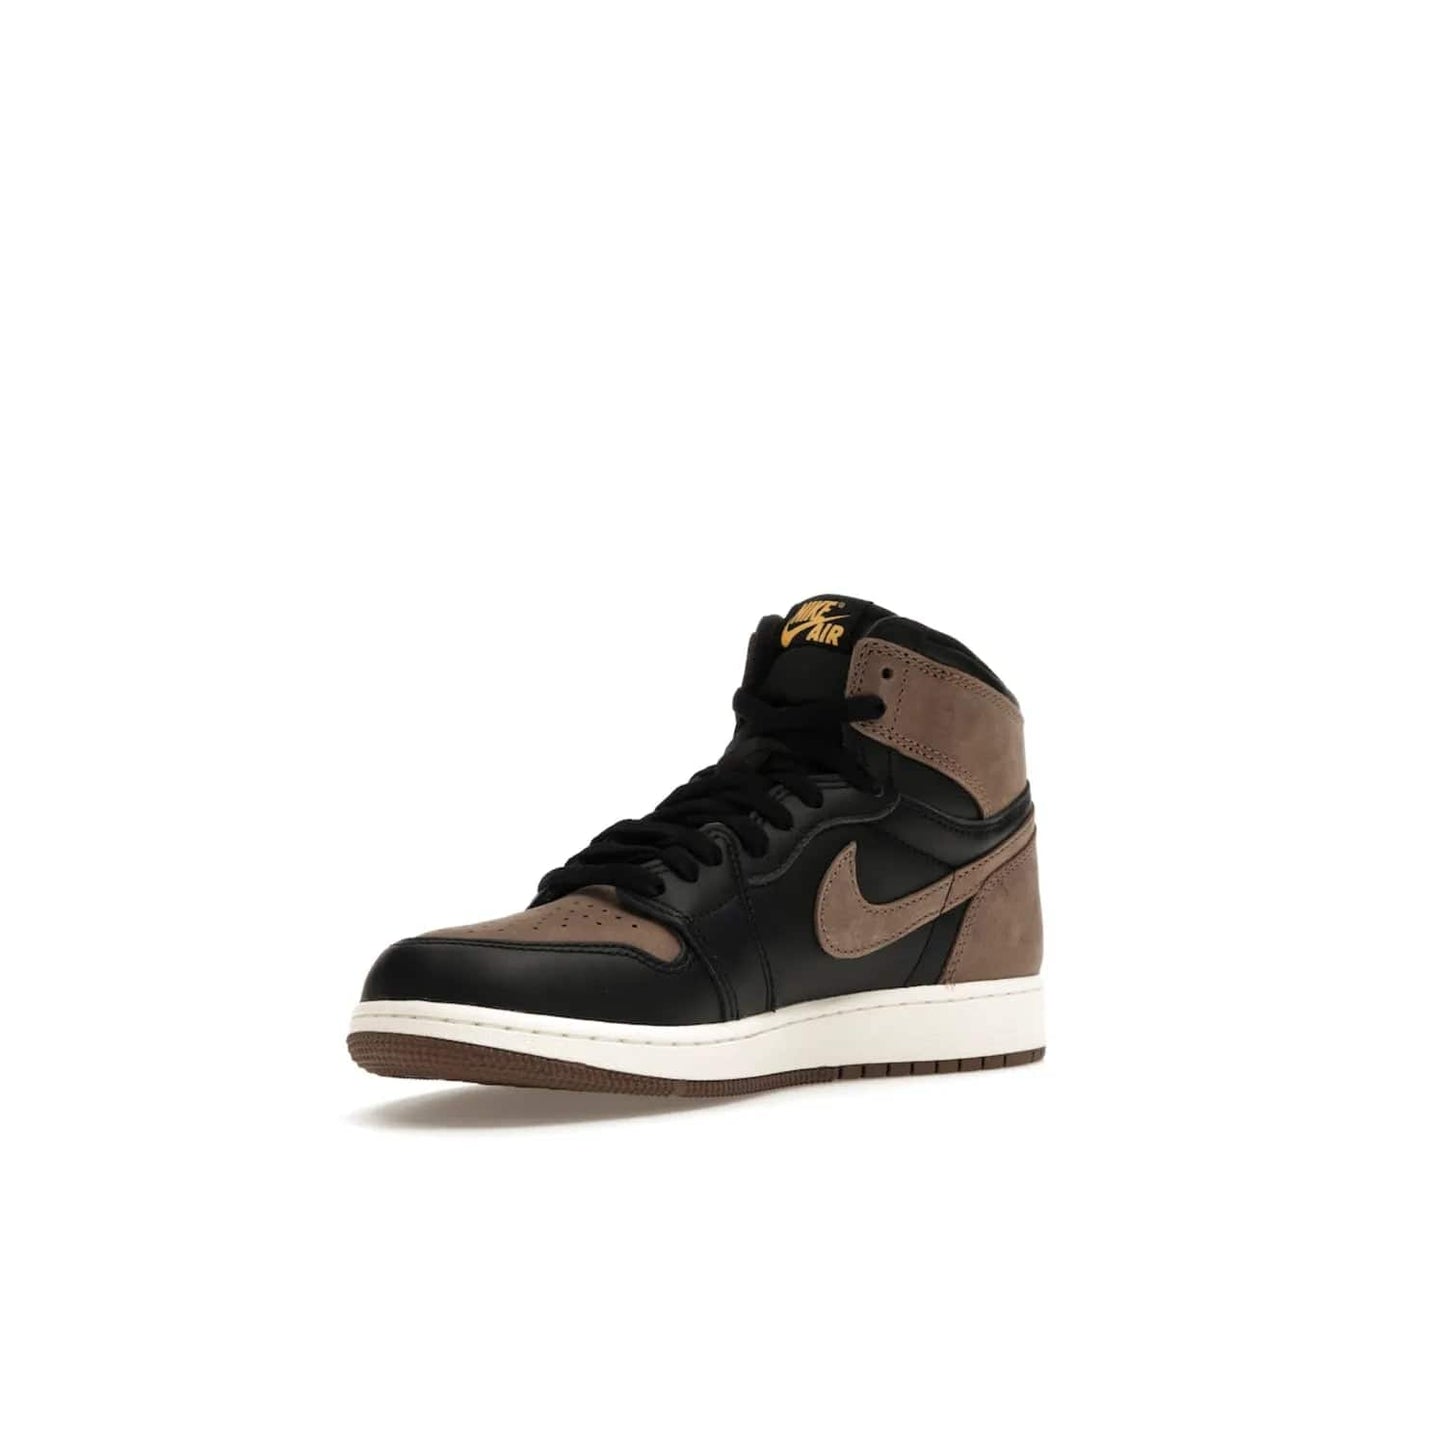 Jordan 1 Retro High OG Palomino (GS) - Image 15 - Only at www.BallersClubKickz.com - Introducing the luxurious Jordan 1 Retro High OG Palomino (GS). Featuring black leather with metallic gold and palomino accents, this sneaker is perfect for any occasion. Grab yours when they release on September 2nd of 2023.